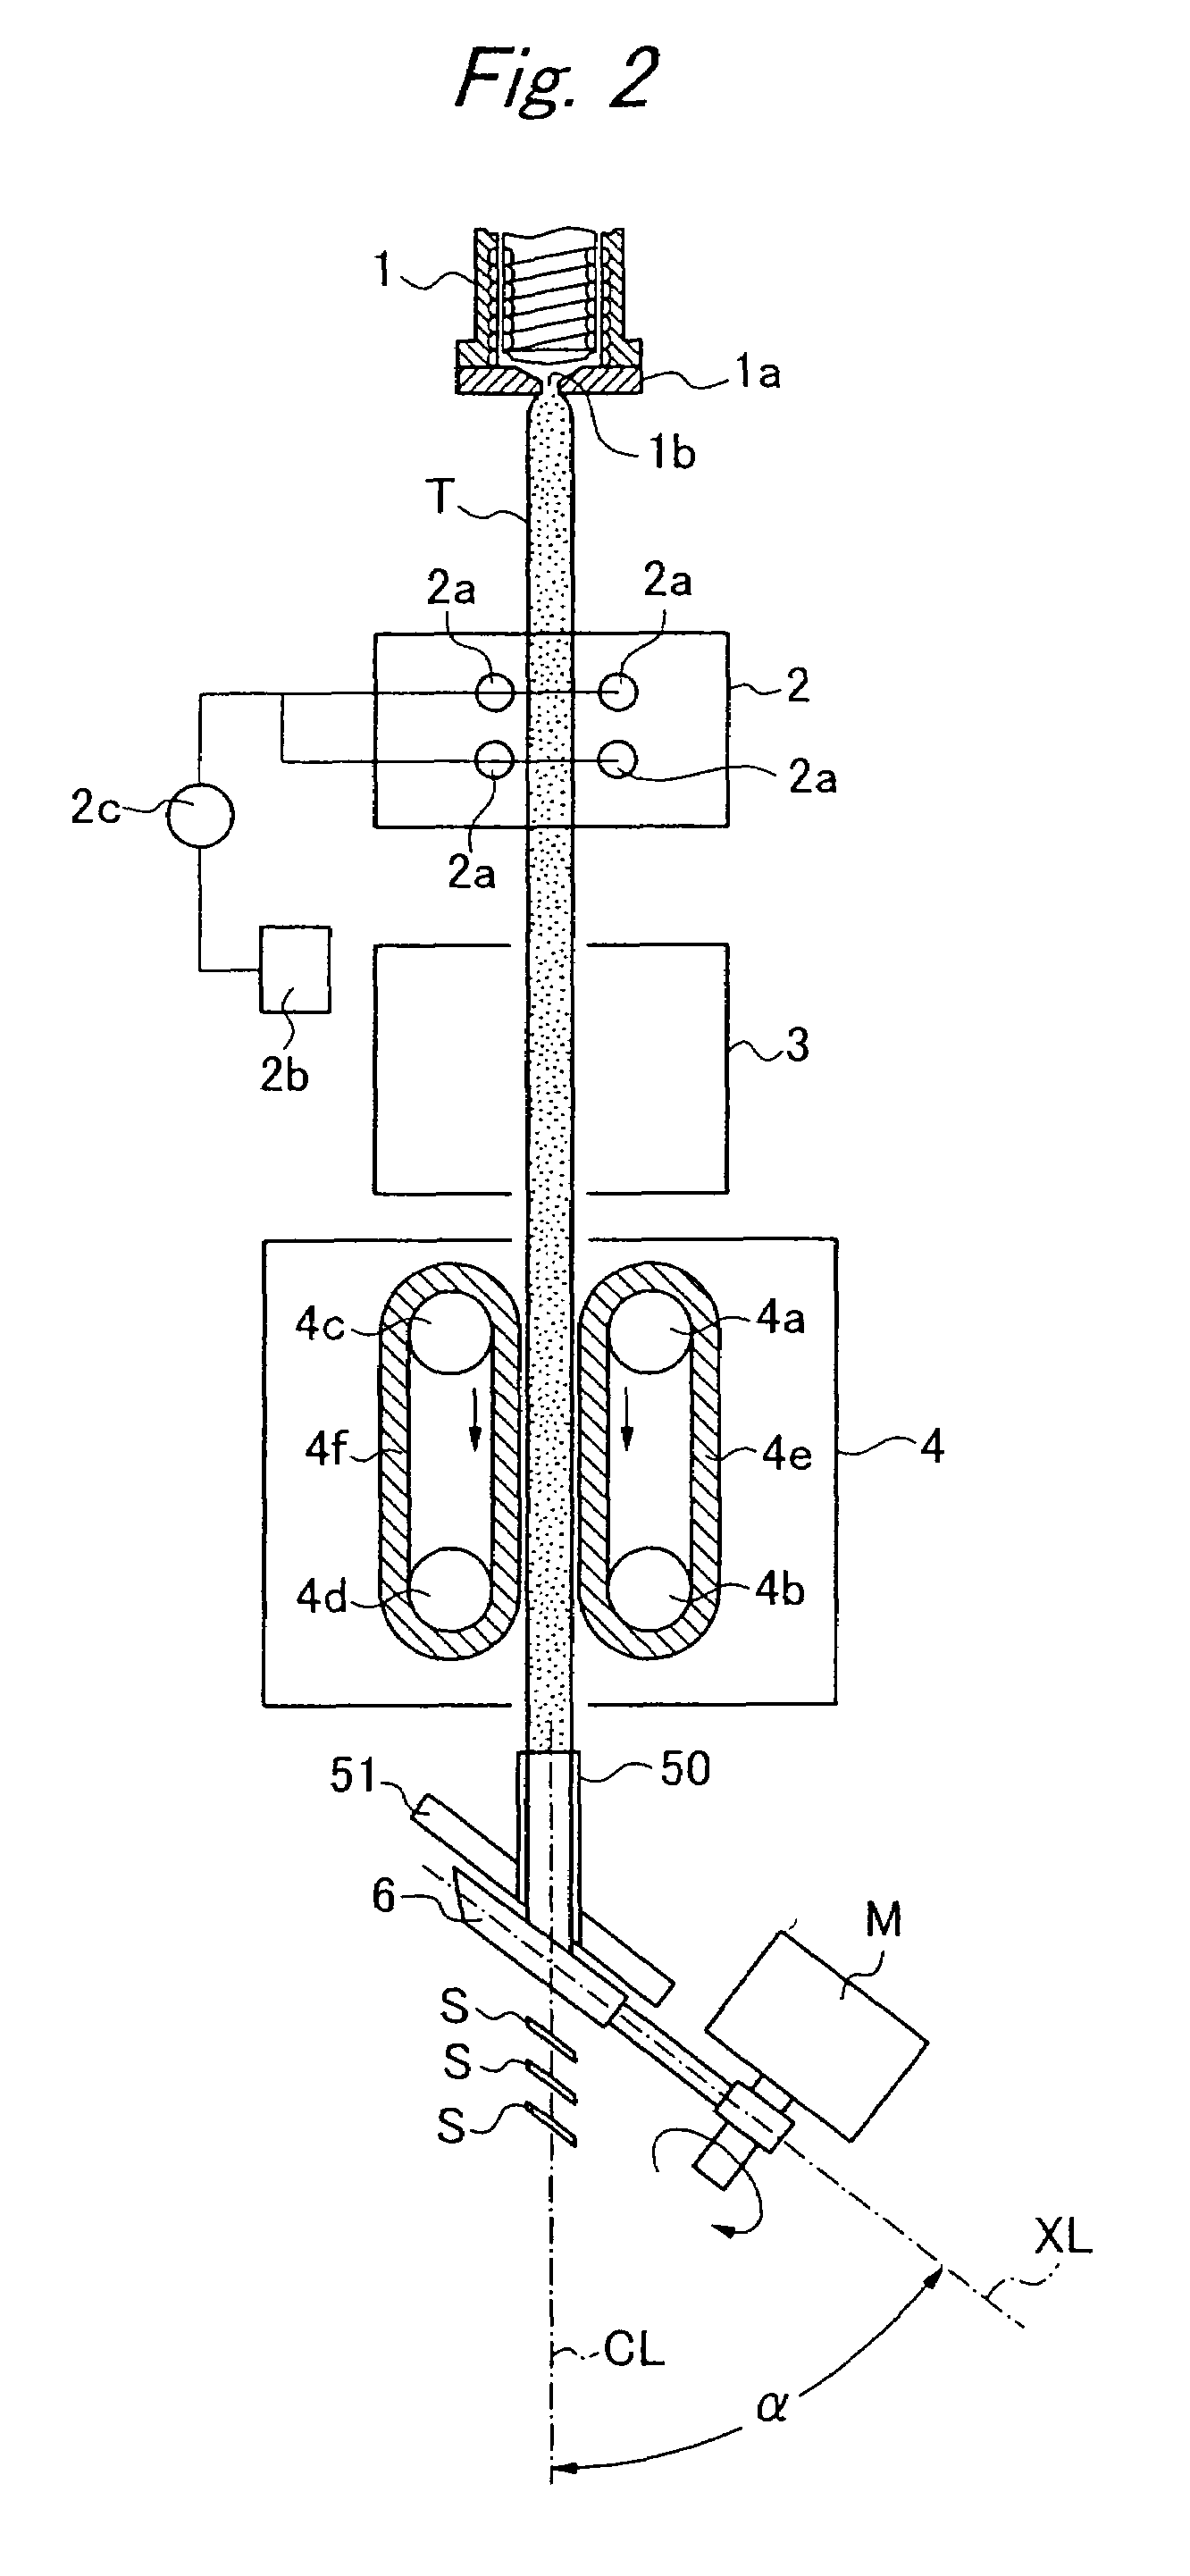 Process for producing puffed snack and production apparatus therefor